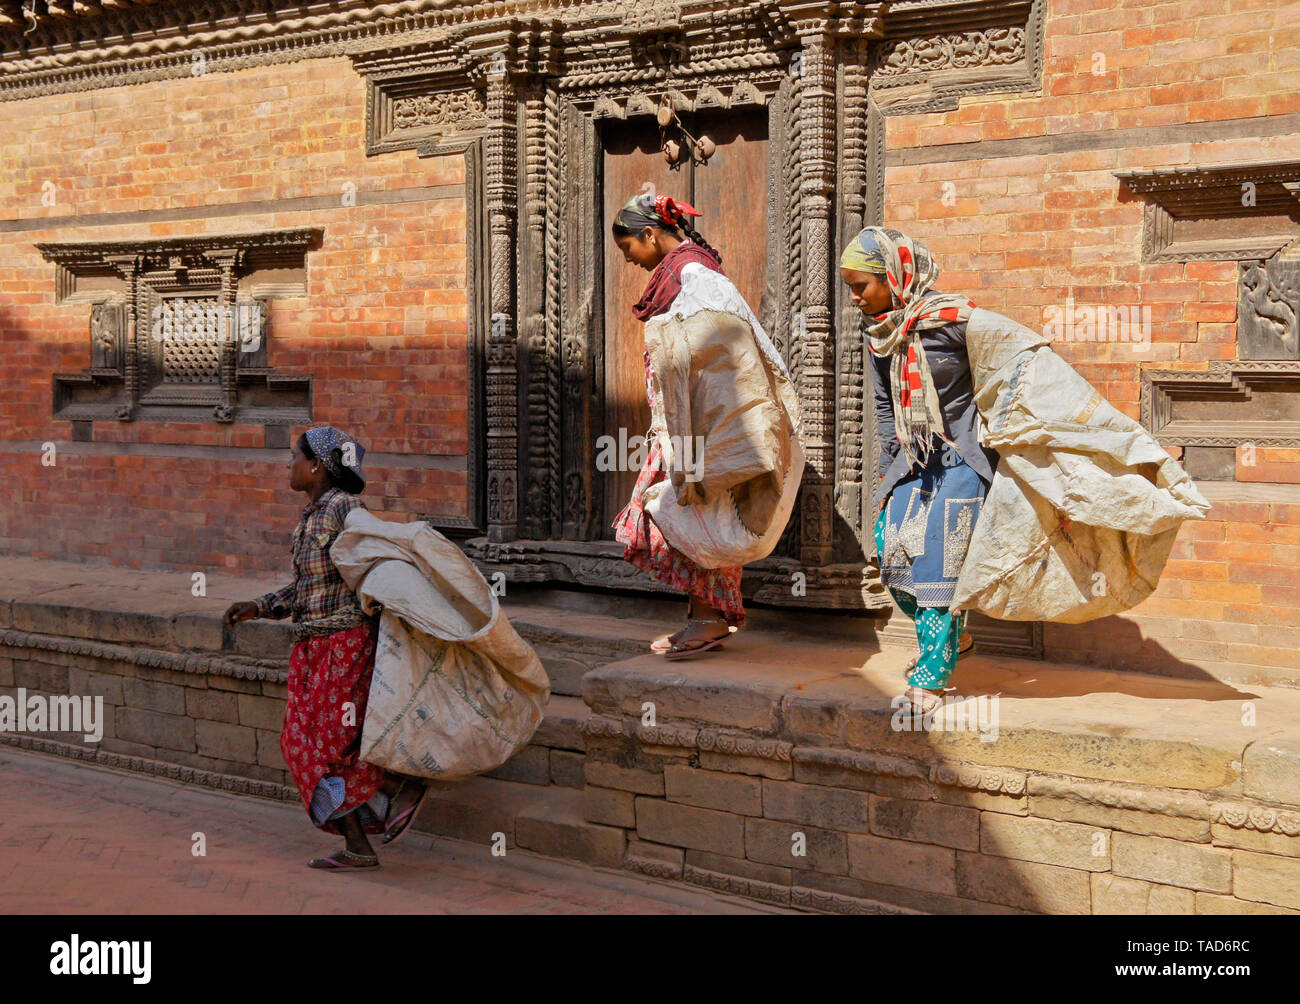 Female workers carrying large bags past carved wood door of old brick building in Durbar Square, Bhaktapur, Kathmandu Valley, Nepal Stock Photo